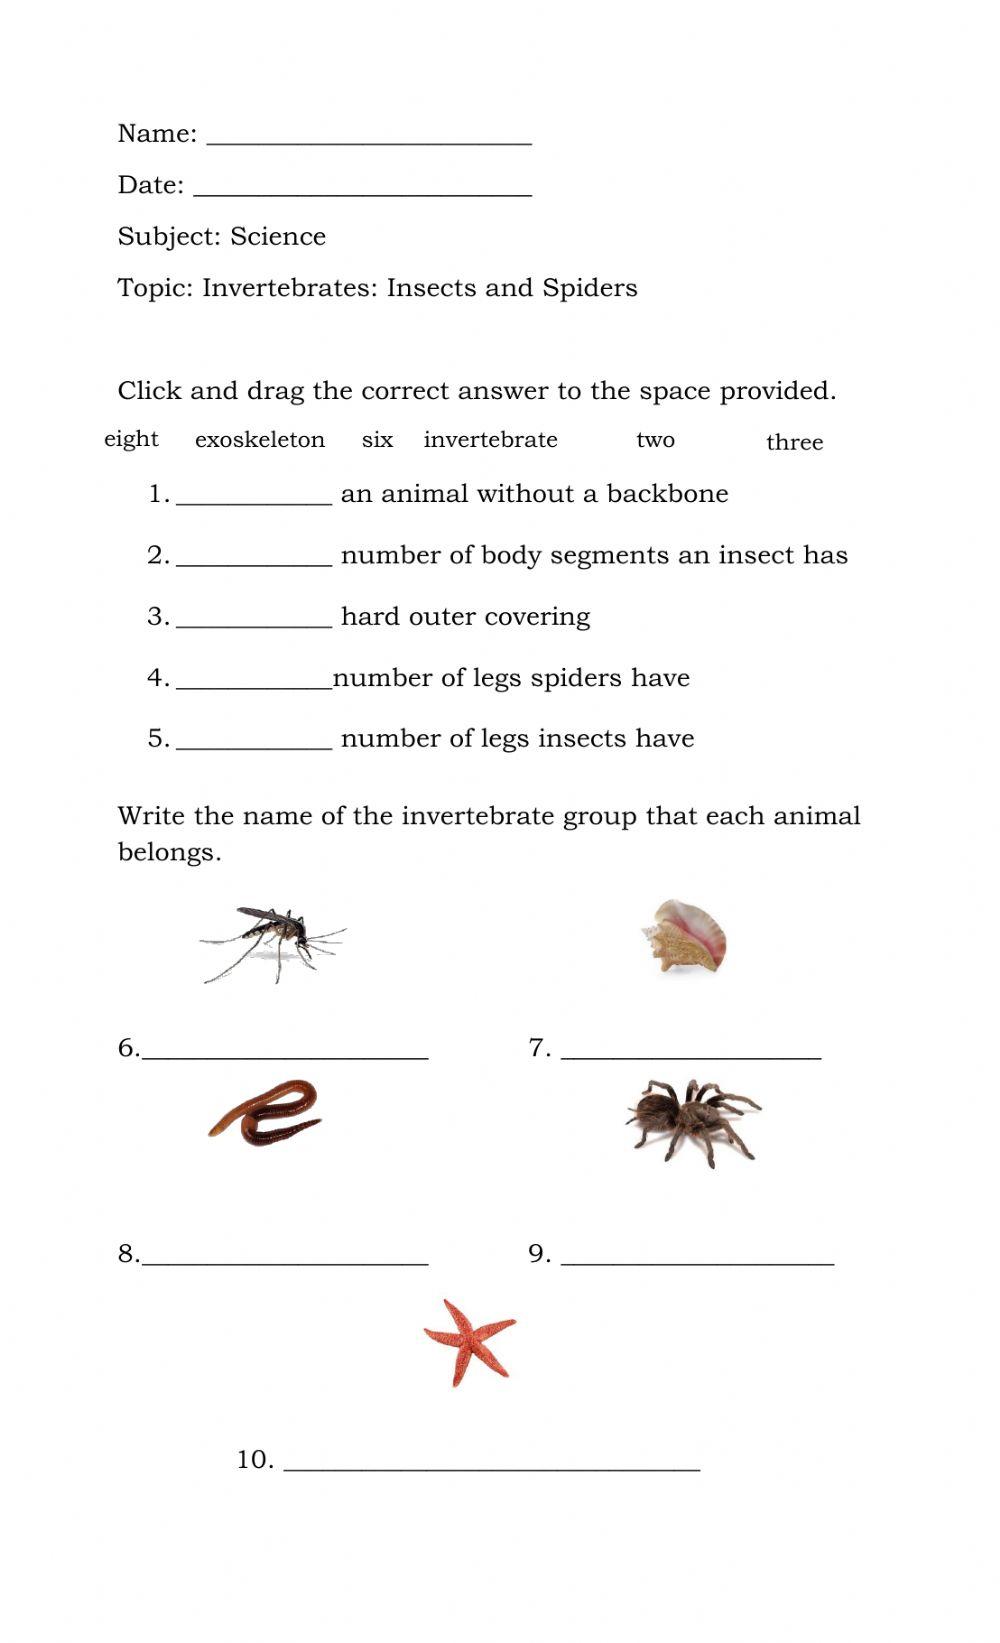 Invertebrates: Insects and Spiders